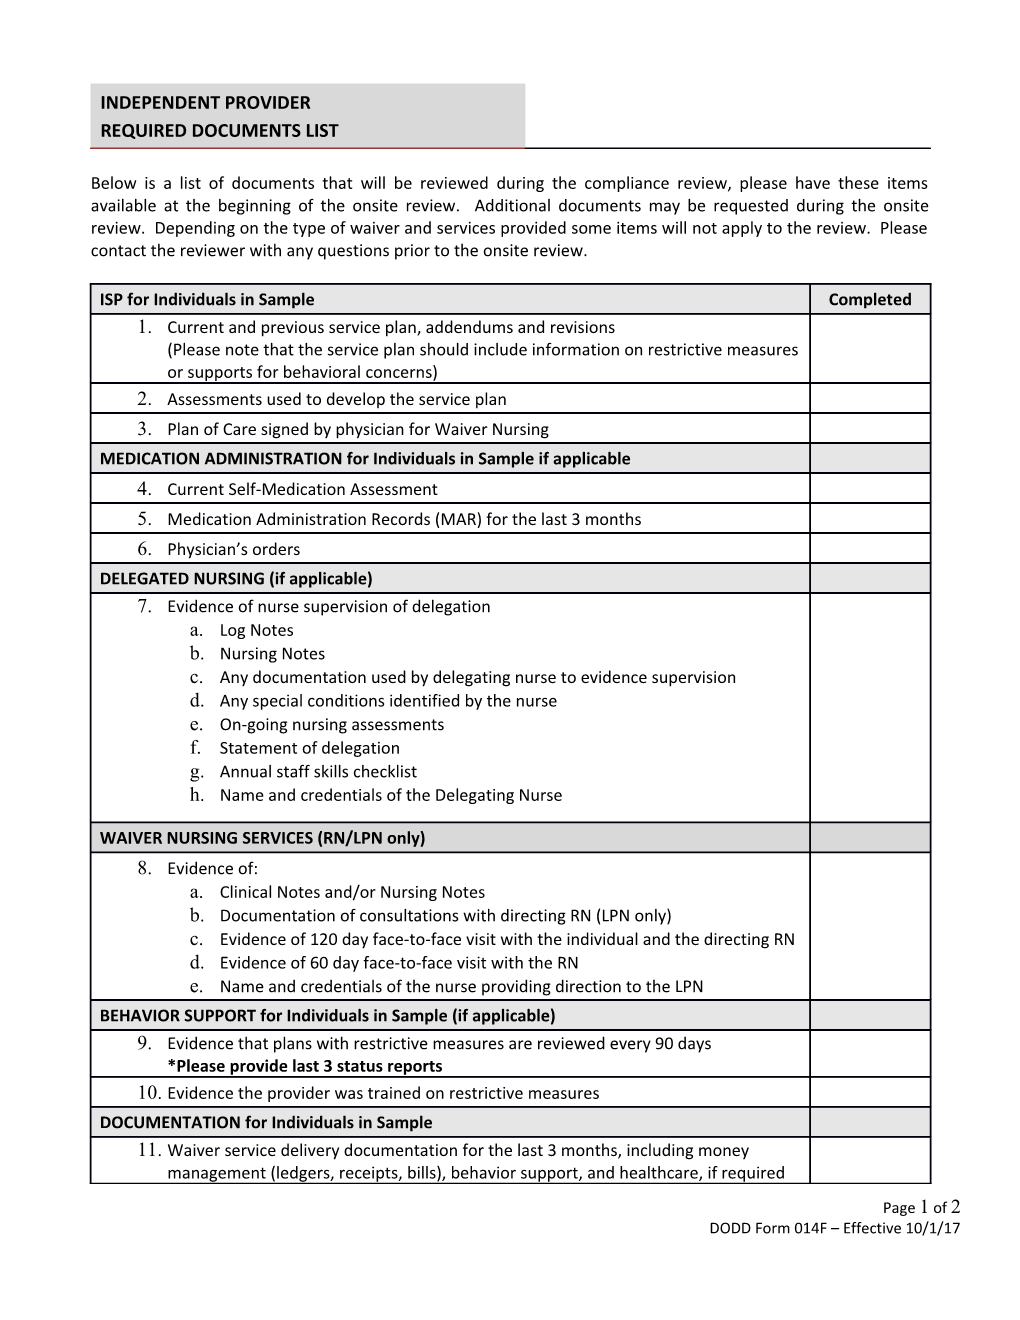 Please Use This As a Checklist for Documents to Have Available for Each Individual/Staff